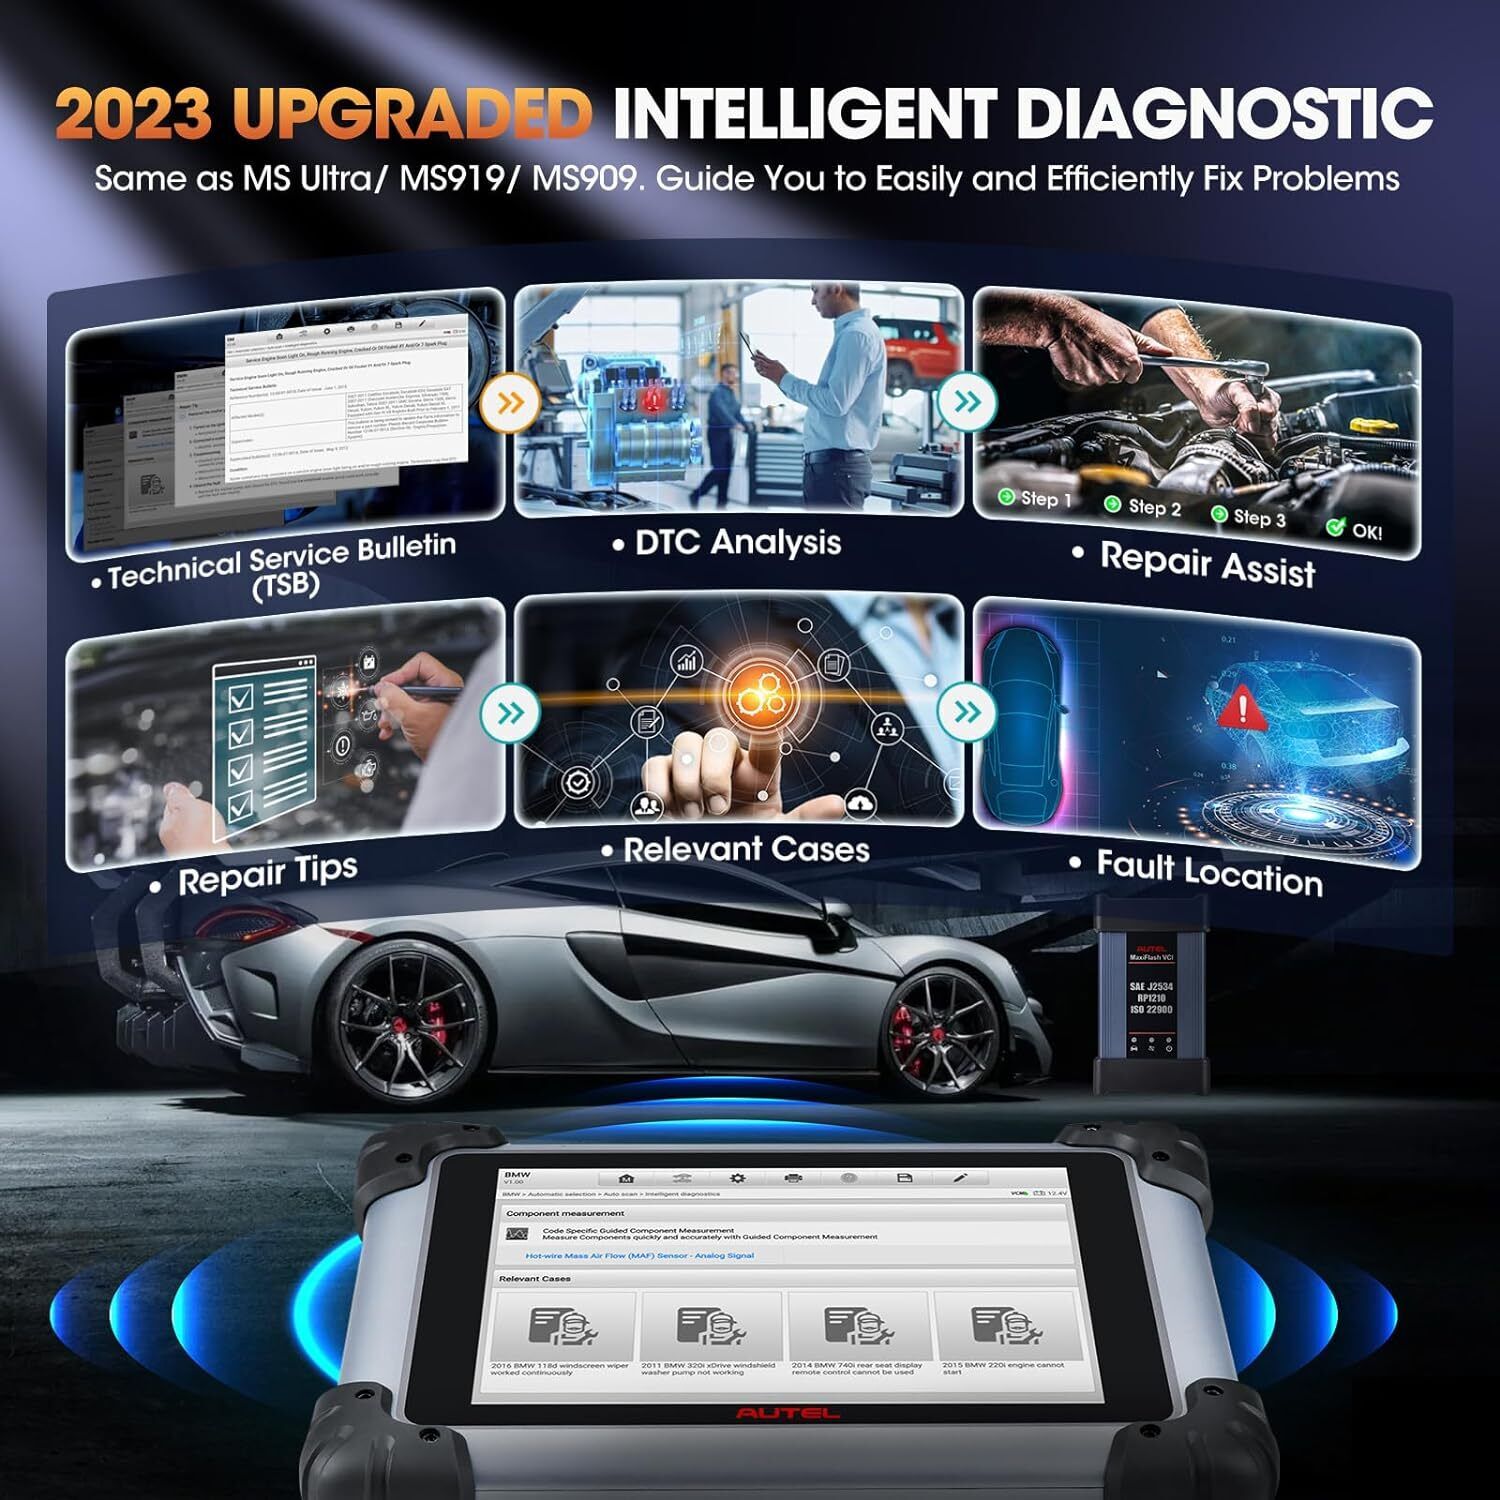 Autel MaxiSys Elite II Pro Automotive Diagnostic Scanner Intelligent Diagnostic 2.0, 40+ Services, CAN FD & DoIP, J2534 Programming Coding, 2-Year Free Update New Ver. of Ultra/ MS919/ MS909 - image 4 of 9